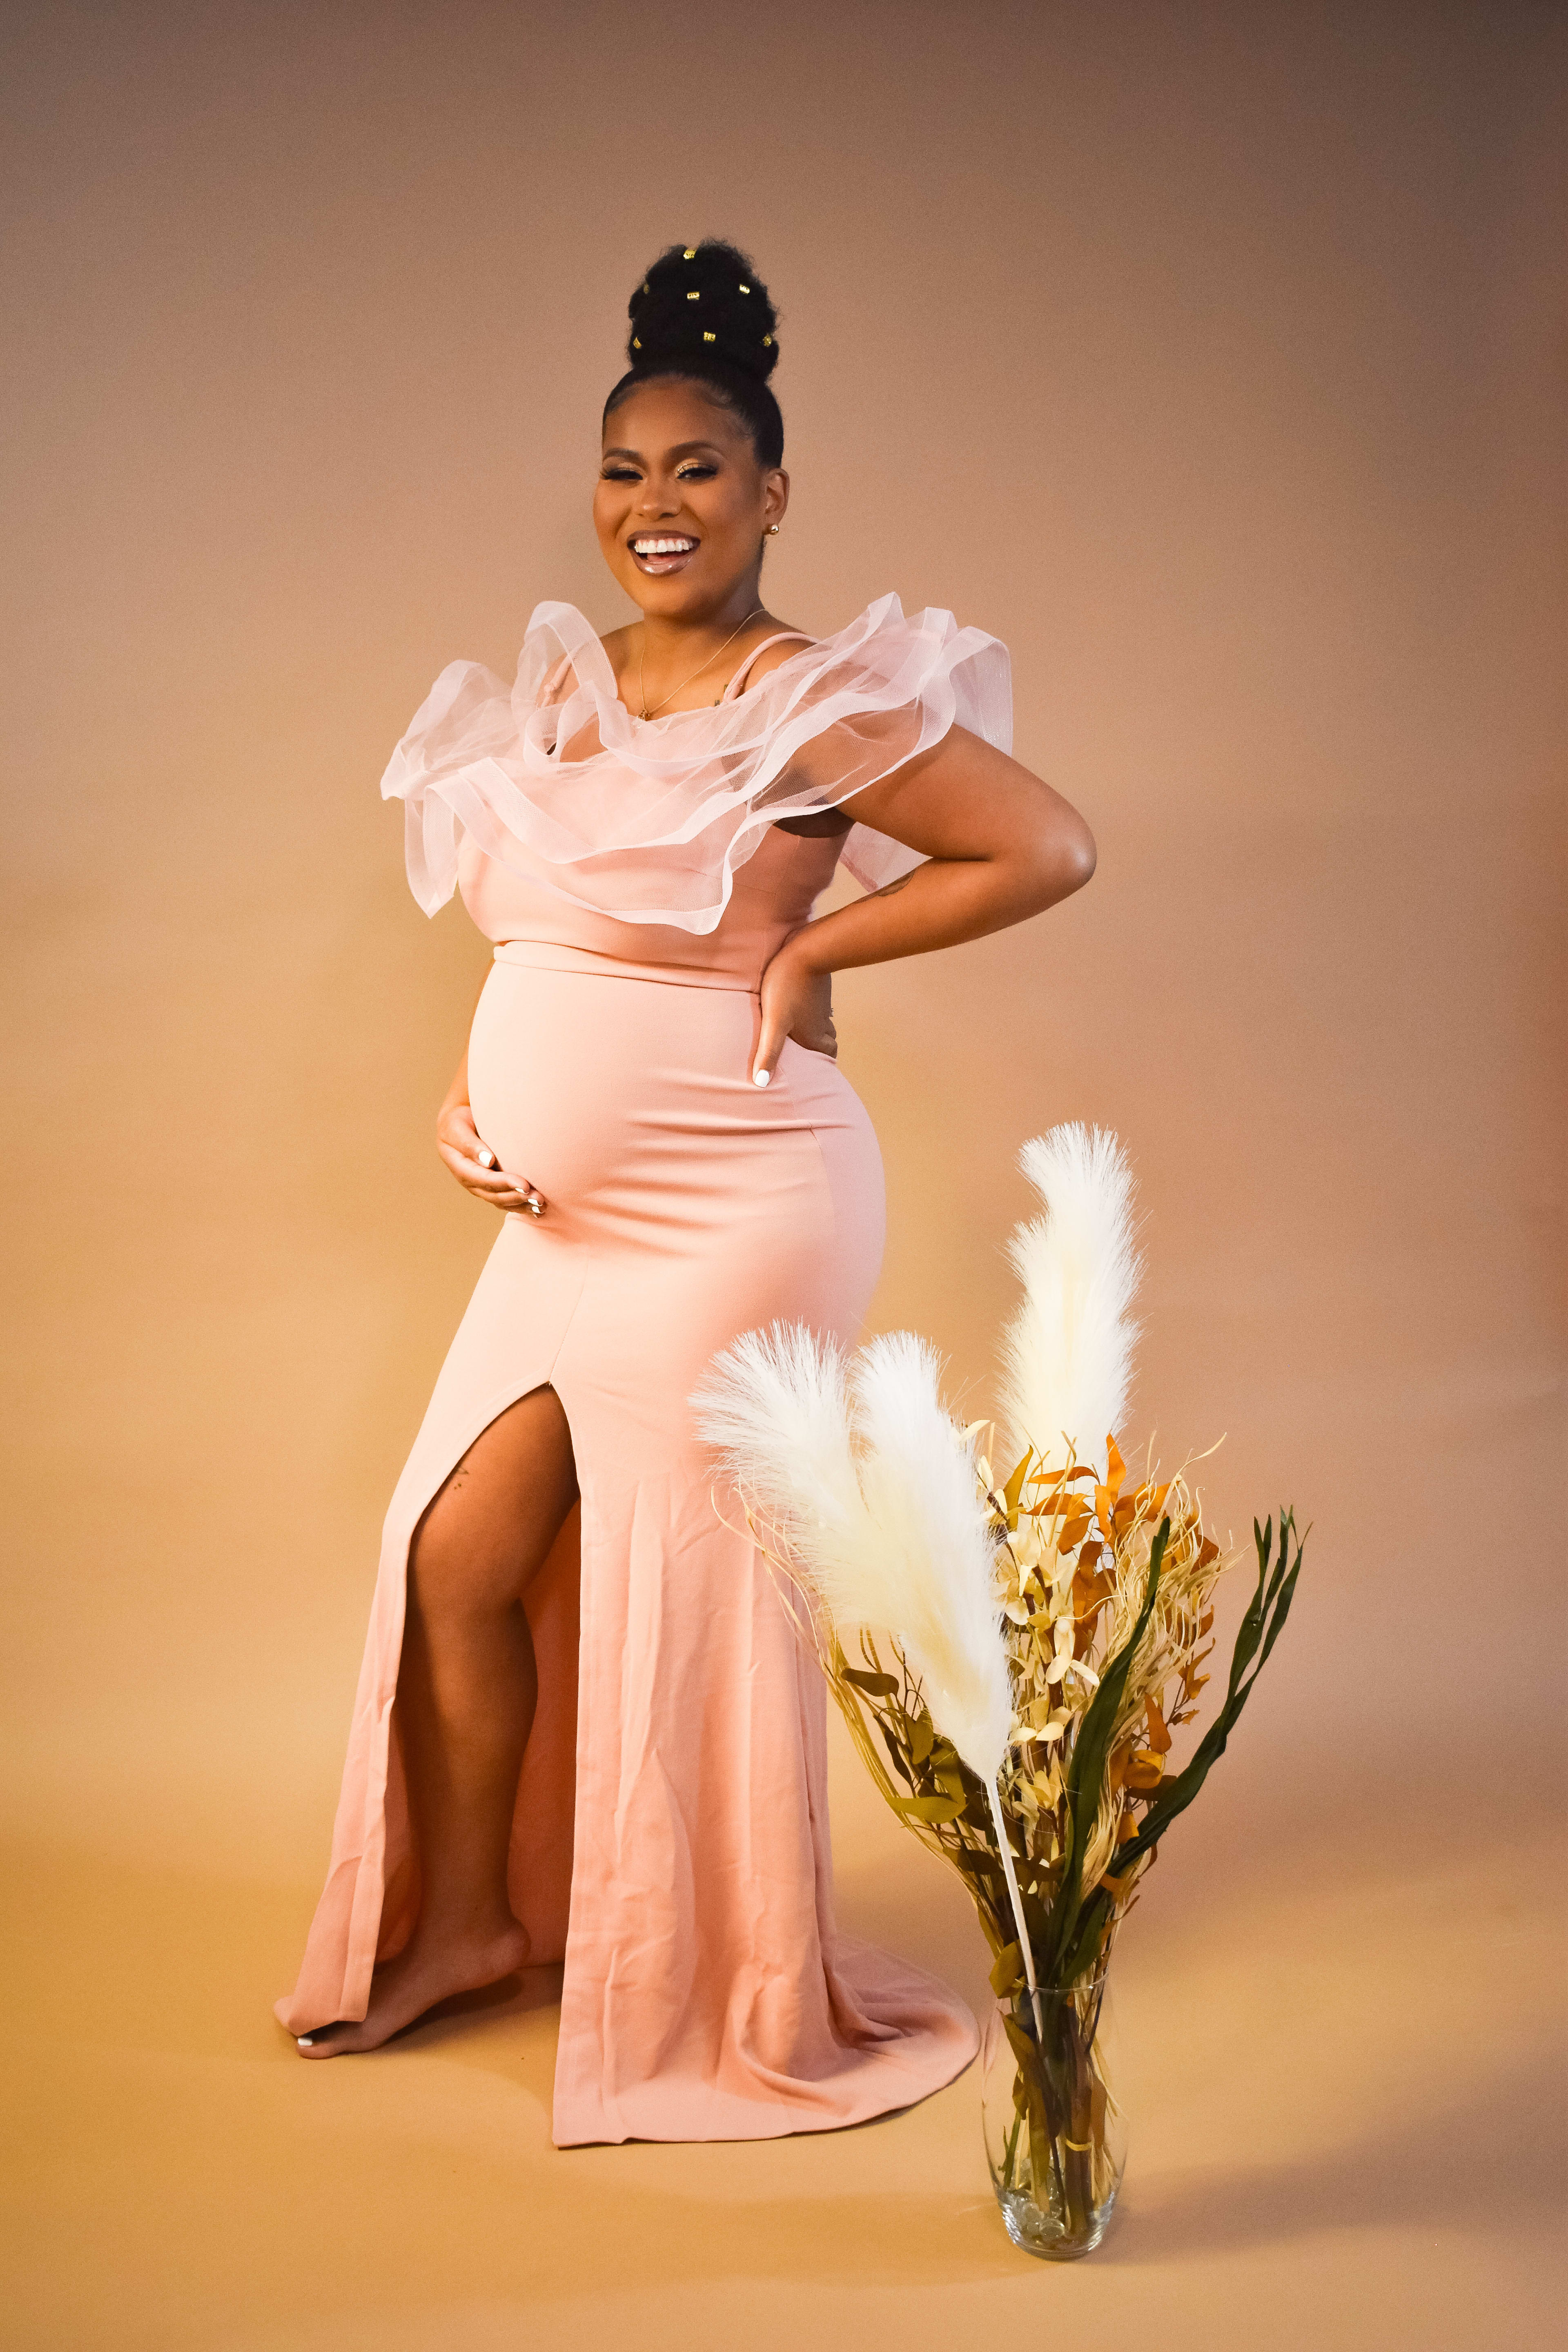 A pregnant woman in a pink boho dress posing next to a vase of flowers during a maternity photo shoot.